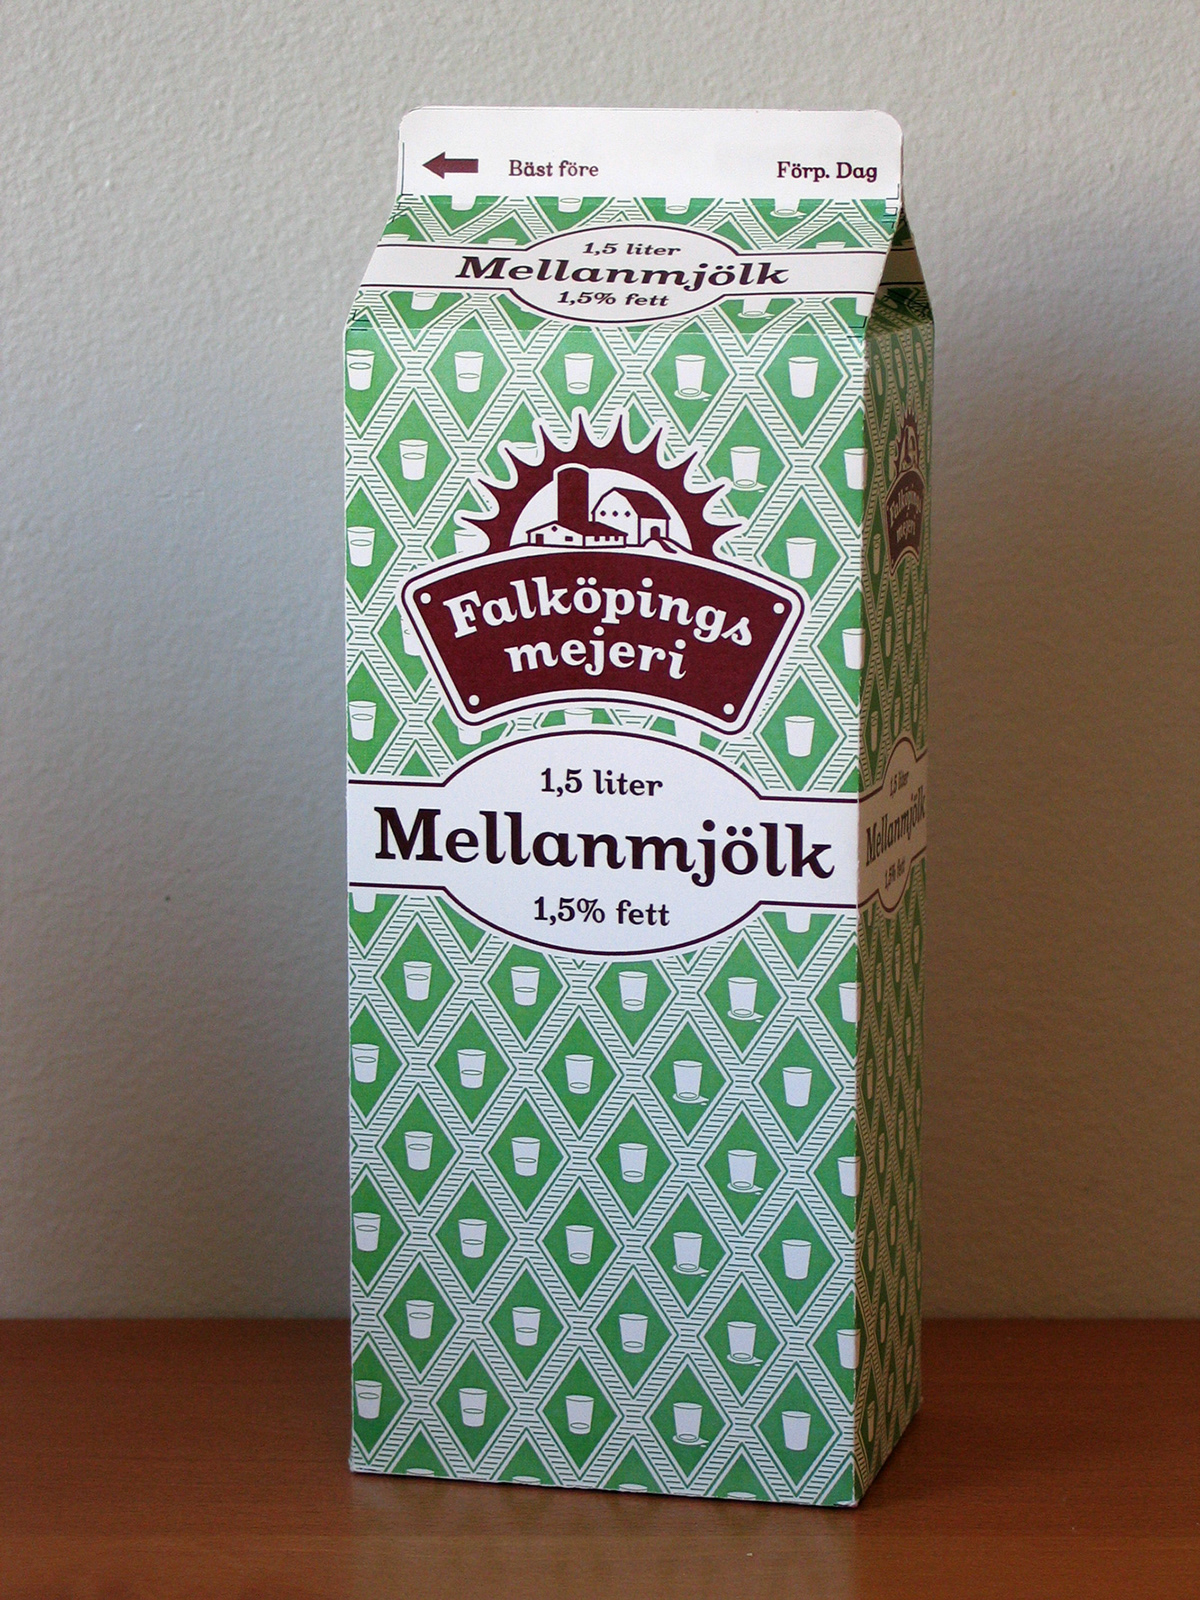 pattern locally produced Dairy